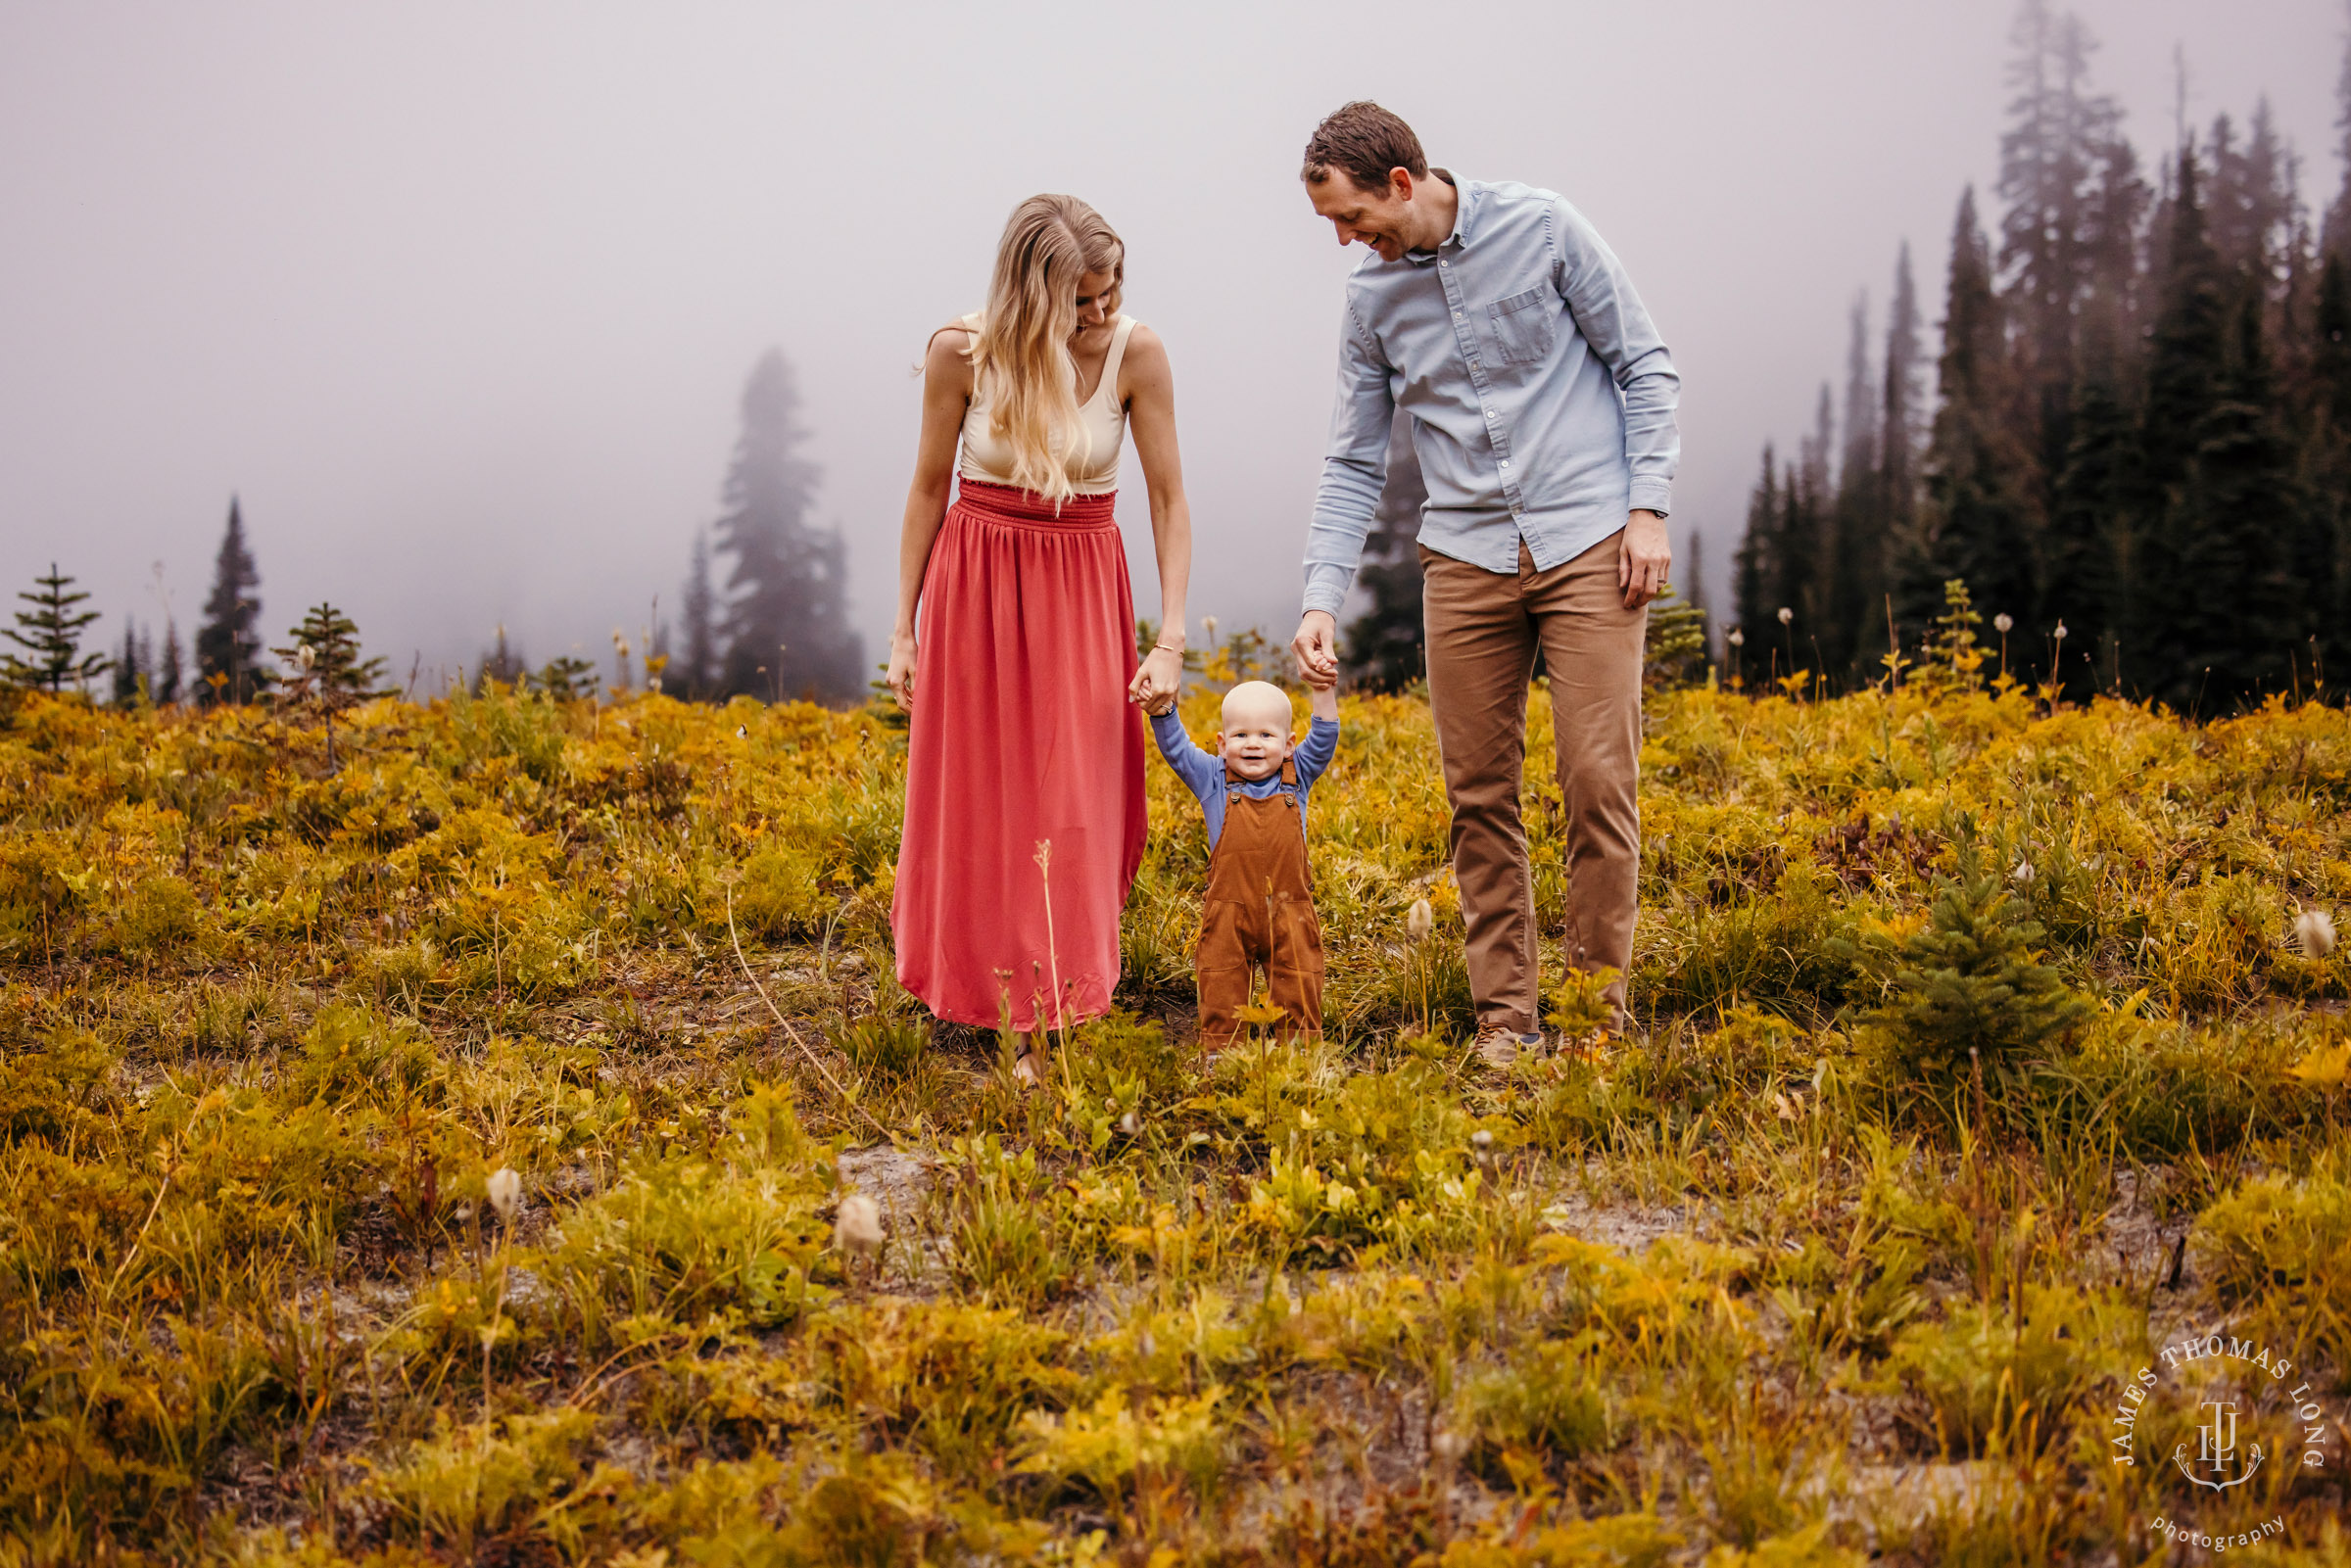 Beautiful Mount Rainier family session by Seattle family photographer James Thomas Long Photography